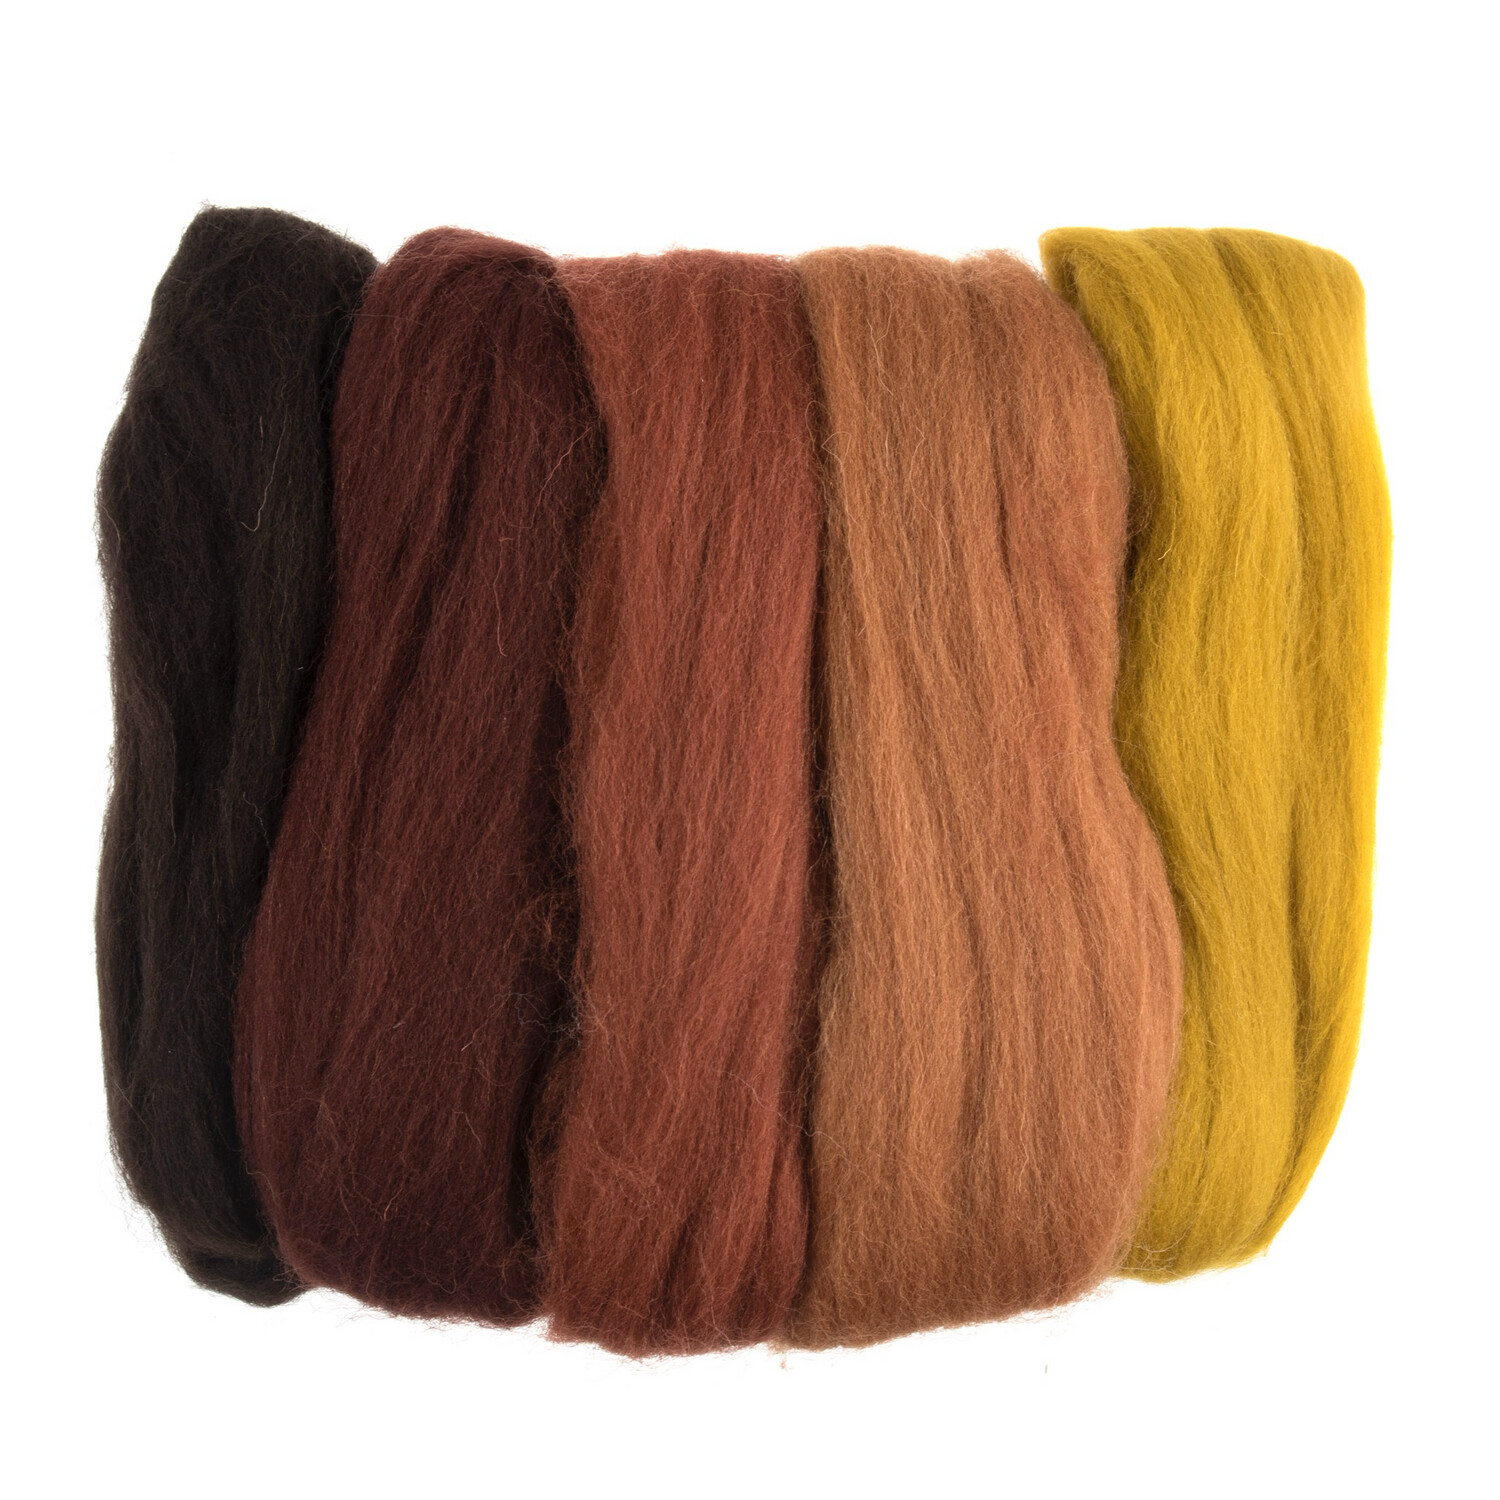 Natural Wool Roving: Assorted Browns